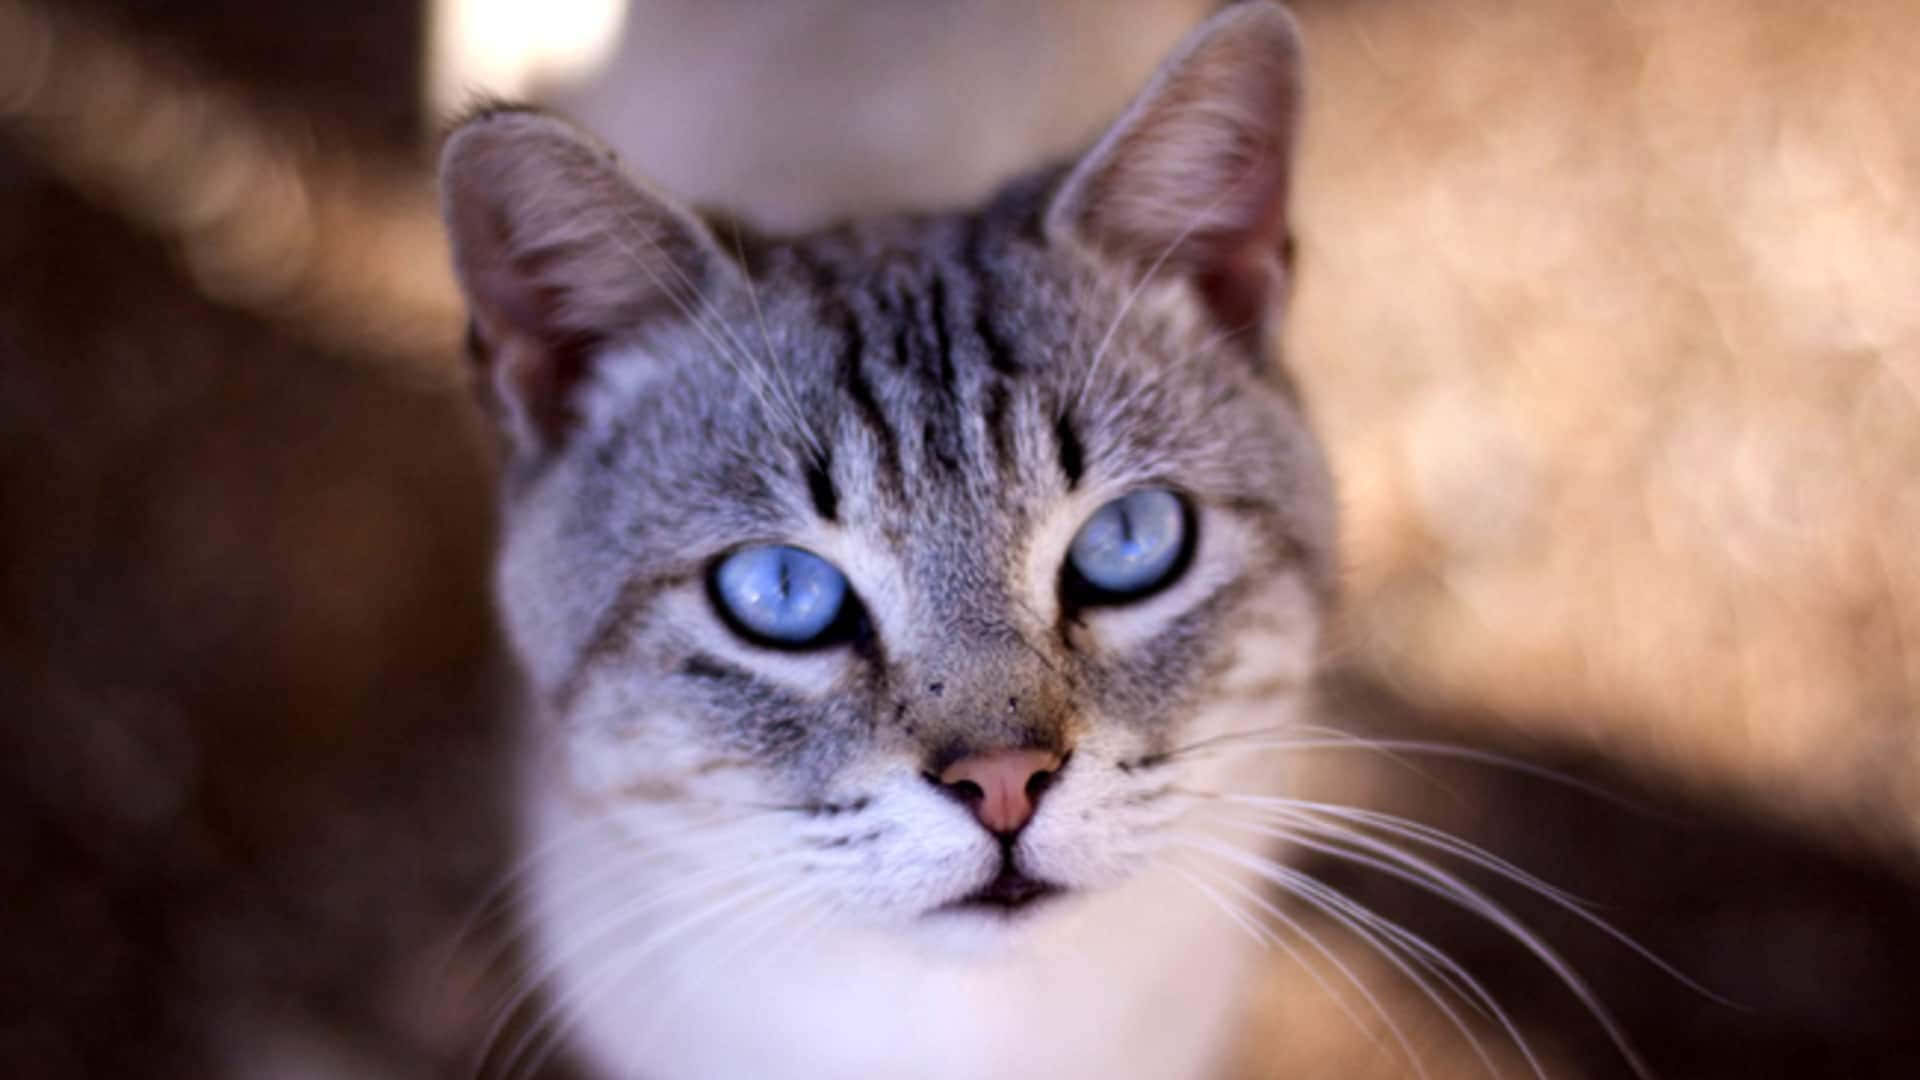 Adorable Ojos Azules Cat with mesmerizing blue eyes on a playful stance Wallpaper